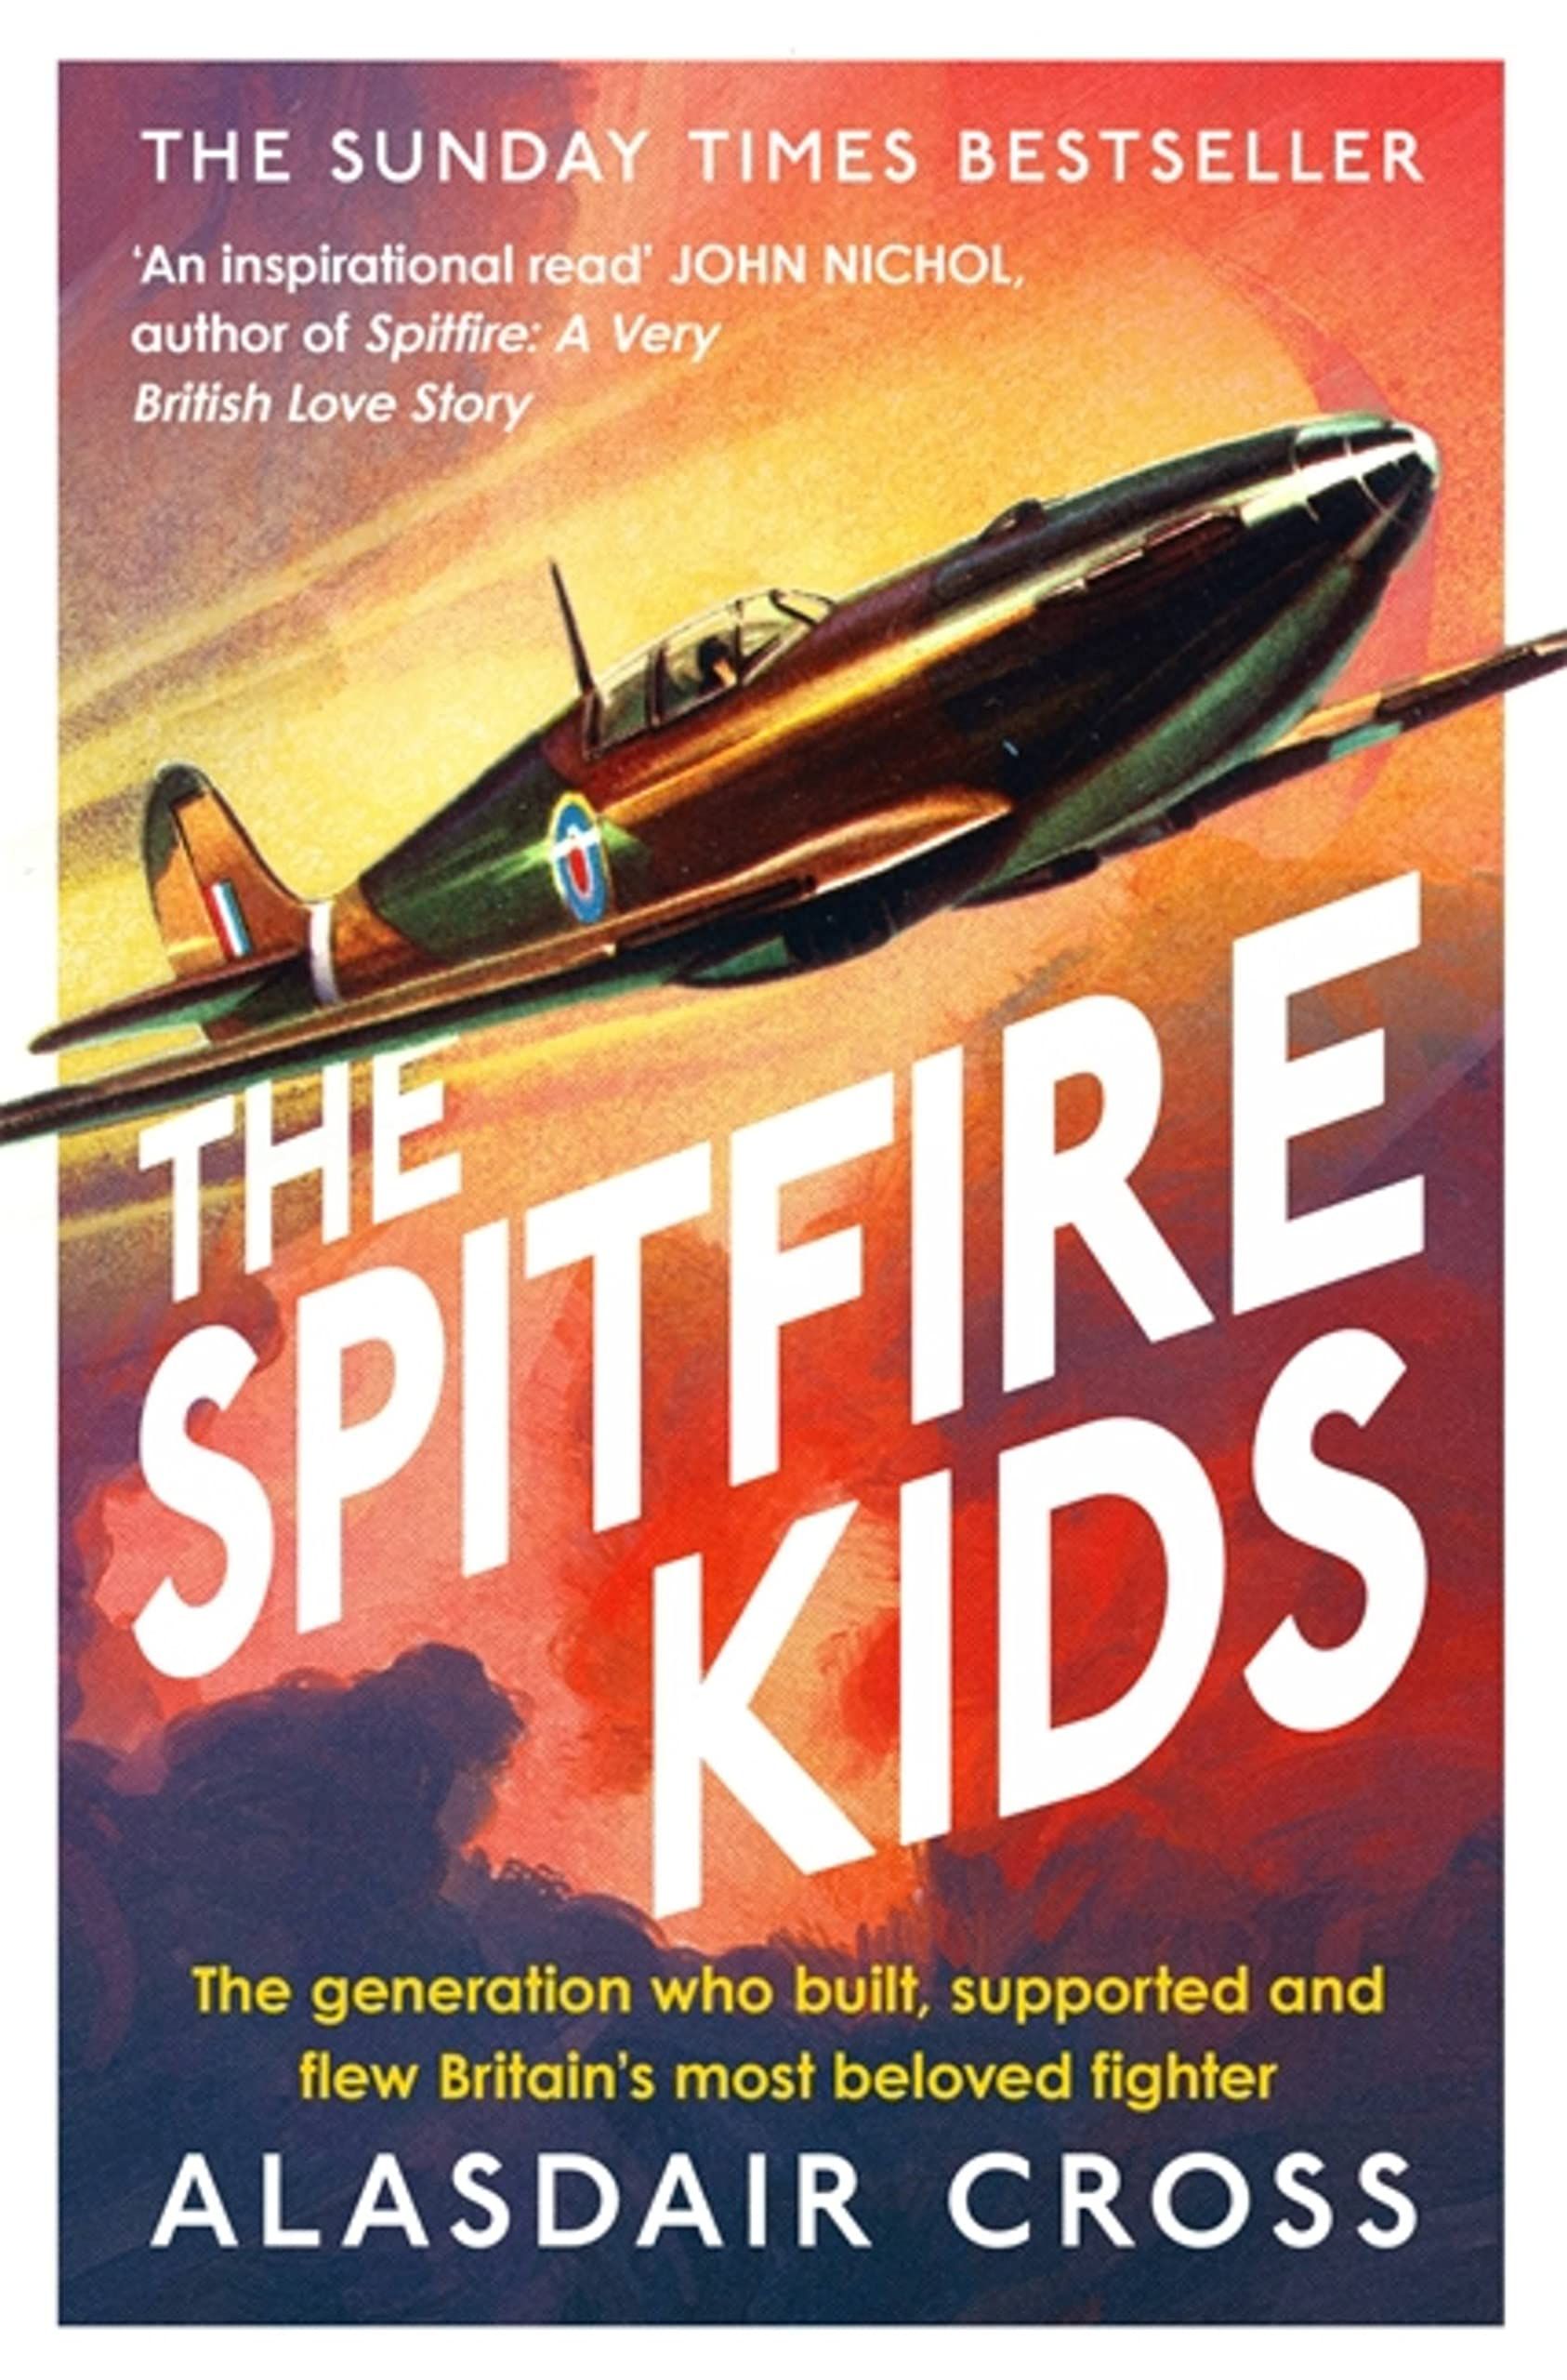 The Spitfire Kids : The generation who built, supported and flew Britain's most beloved fighter